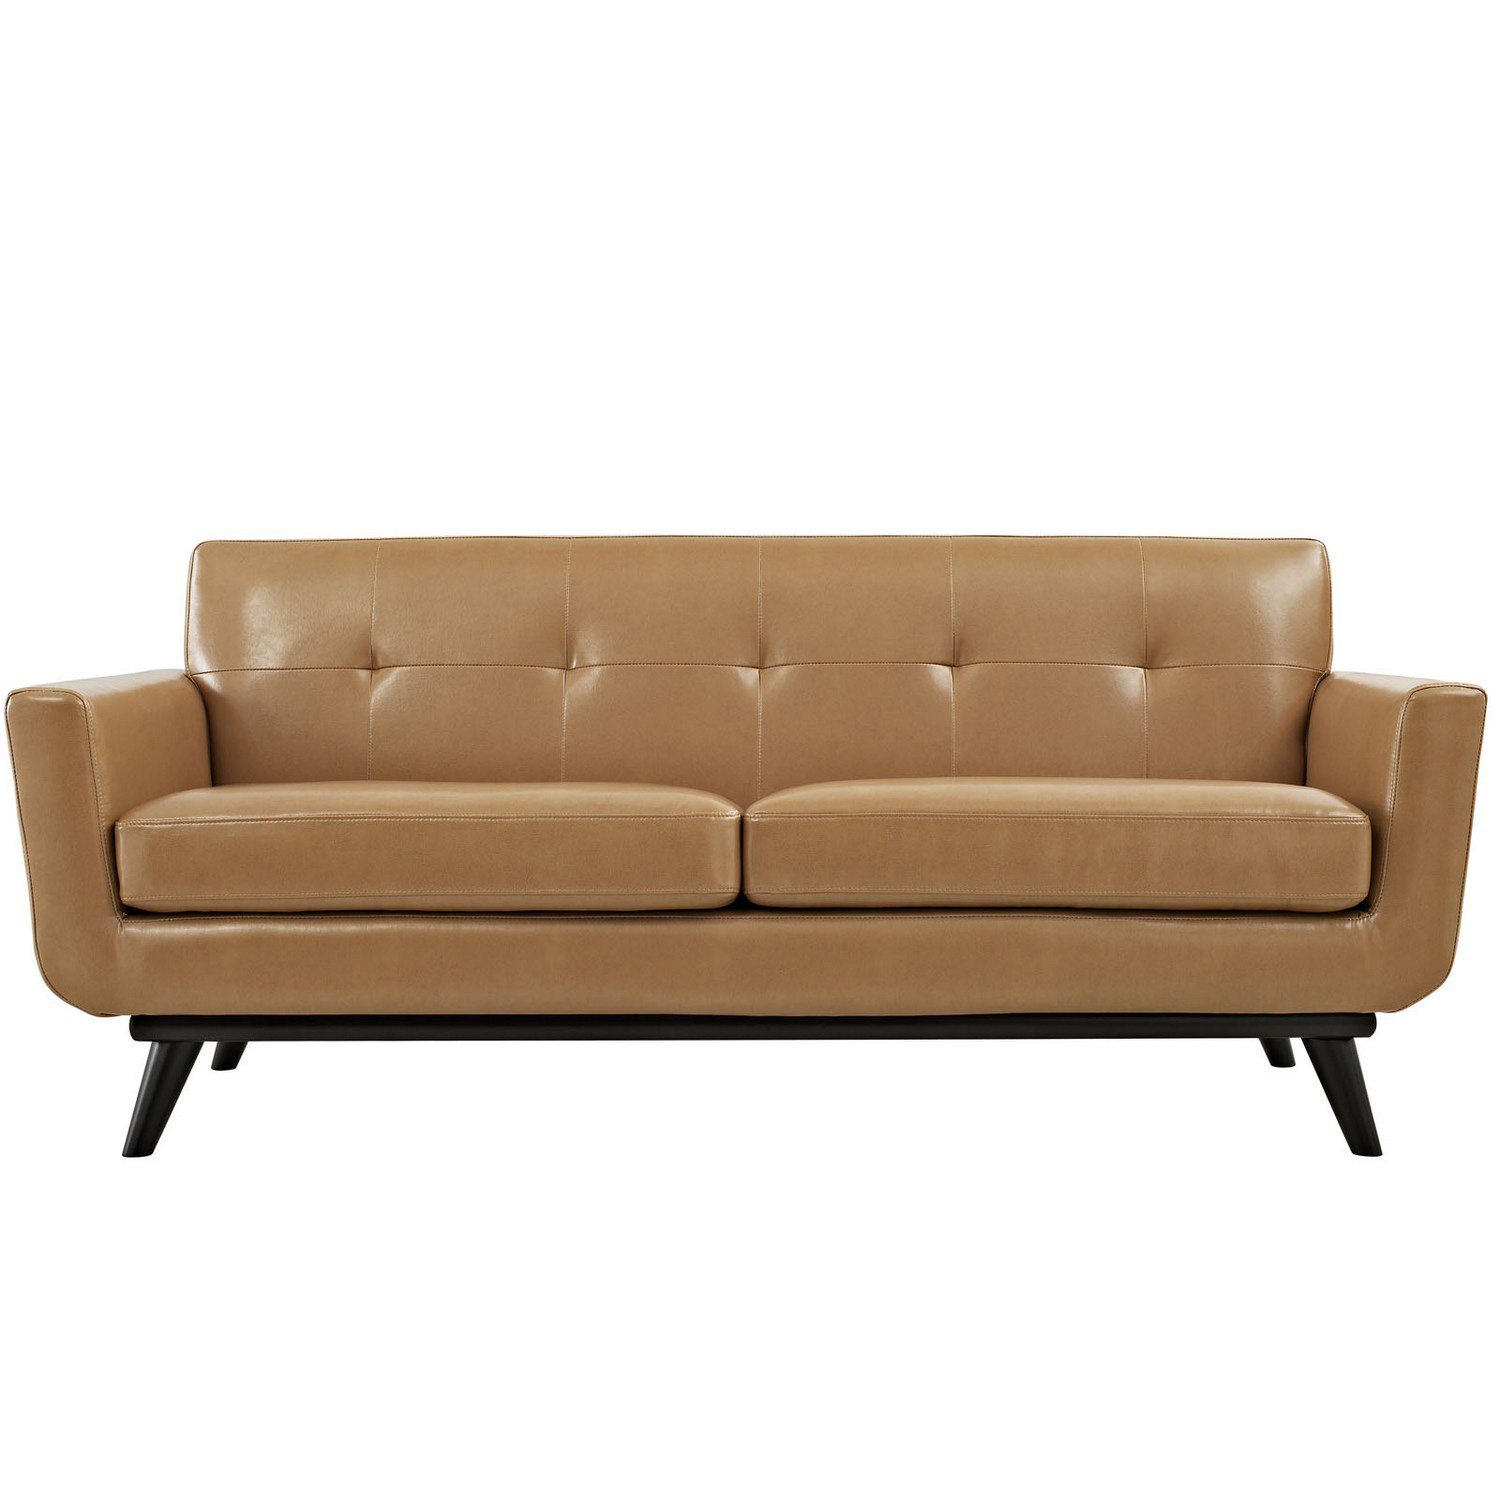 Modway Engage Bonded Leather Loveseat - Tan